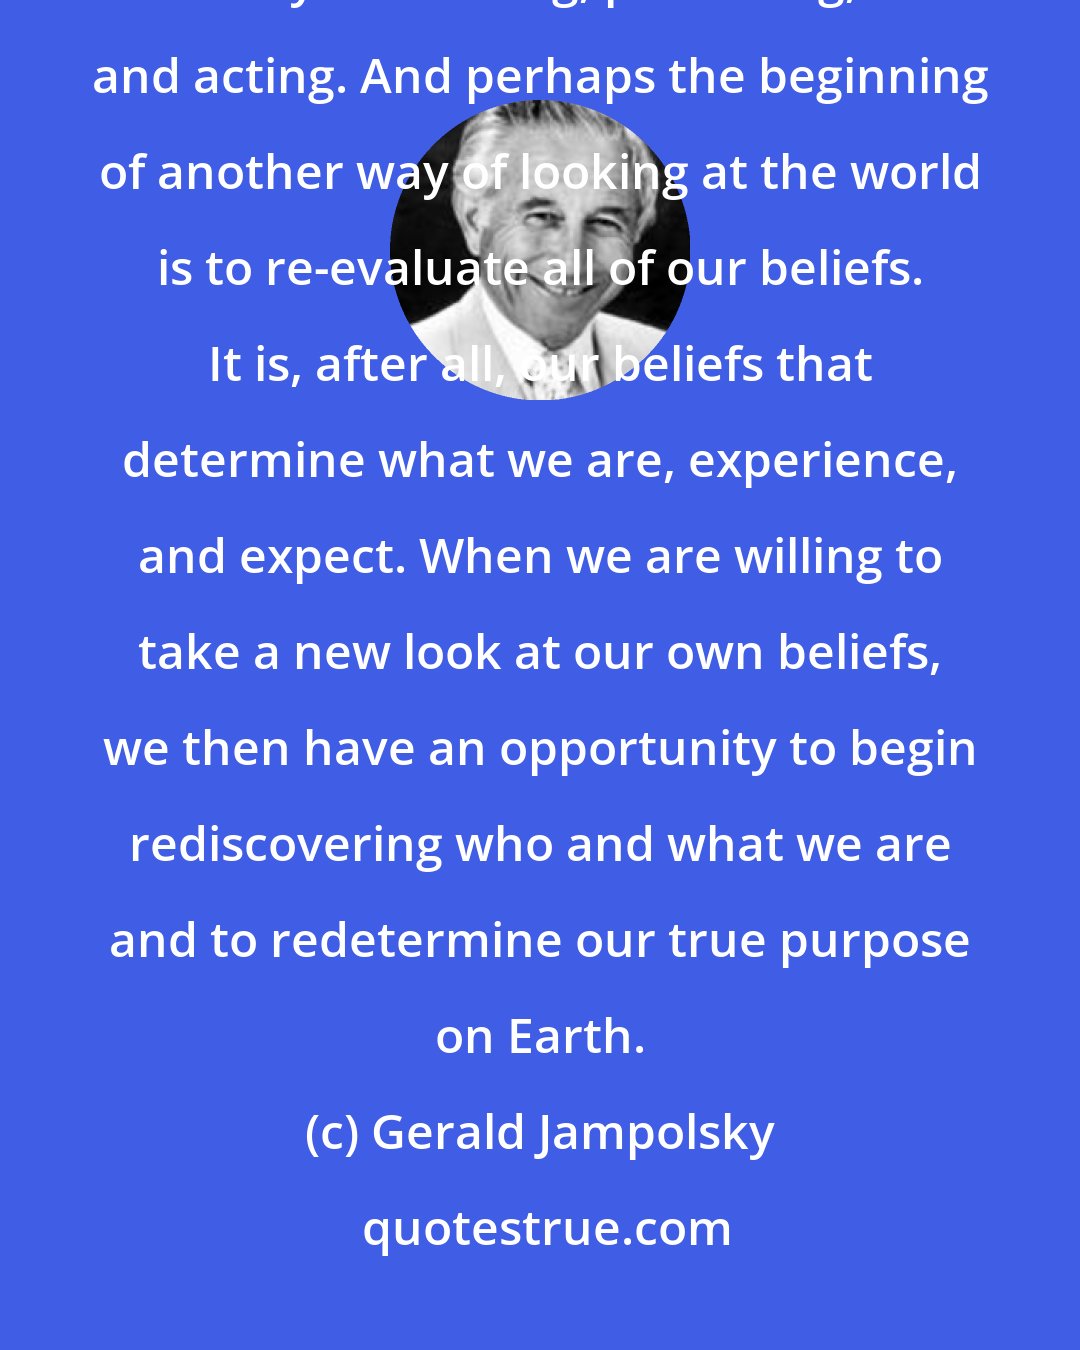 Gerald Jampolsky: More and more people are beginning to feel that there must be another way of thinking, perceiving, and acting. And perhaps the beginning of another way of looking at the world is to re-evaluate all of our beliefs. It is, after all, our beliefs that determine what we are, experience, and expect. When we are willing to take a new look at our own beliefs, we then have an opportunity to begin rediscovering who and what we are and to redetermine our true purpose on Earth.